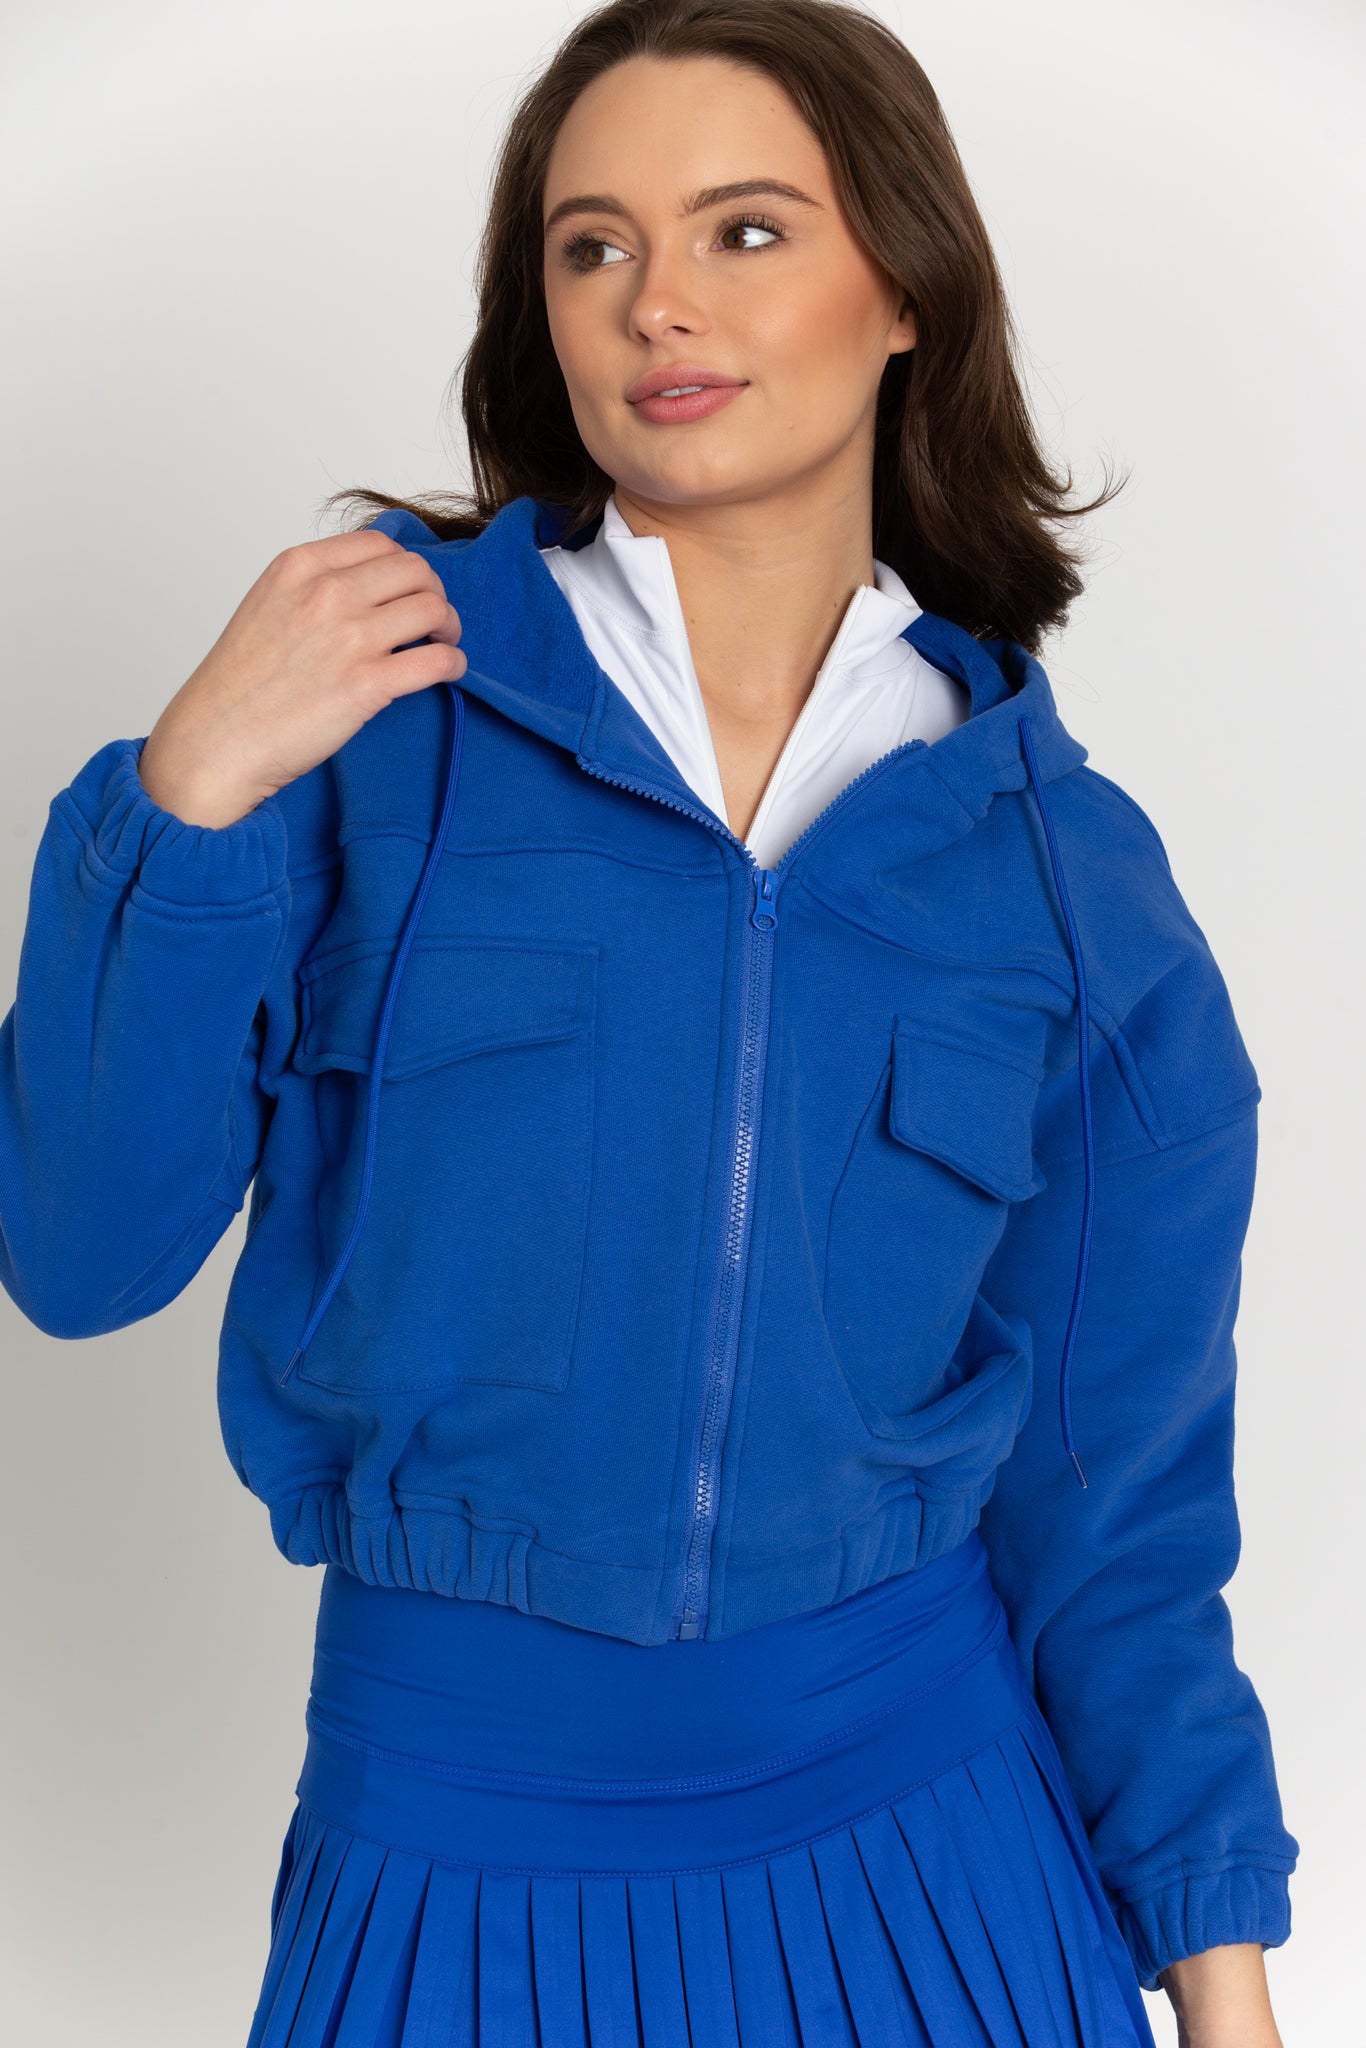 A cobalt blue hoodie jacket made of thick cotton blend with fleece lining. It features two front pockets, a drawstring hood and elastic waist/wrist bands. Stylish and versatile - perfect for any occasion.